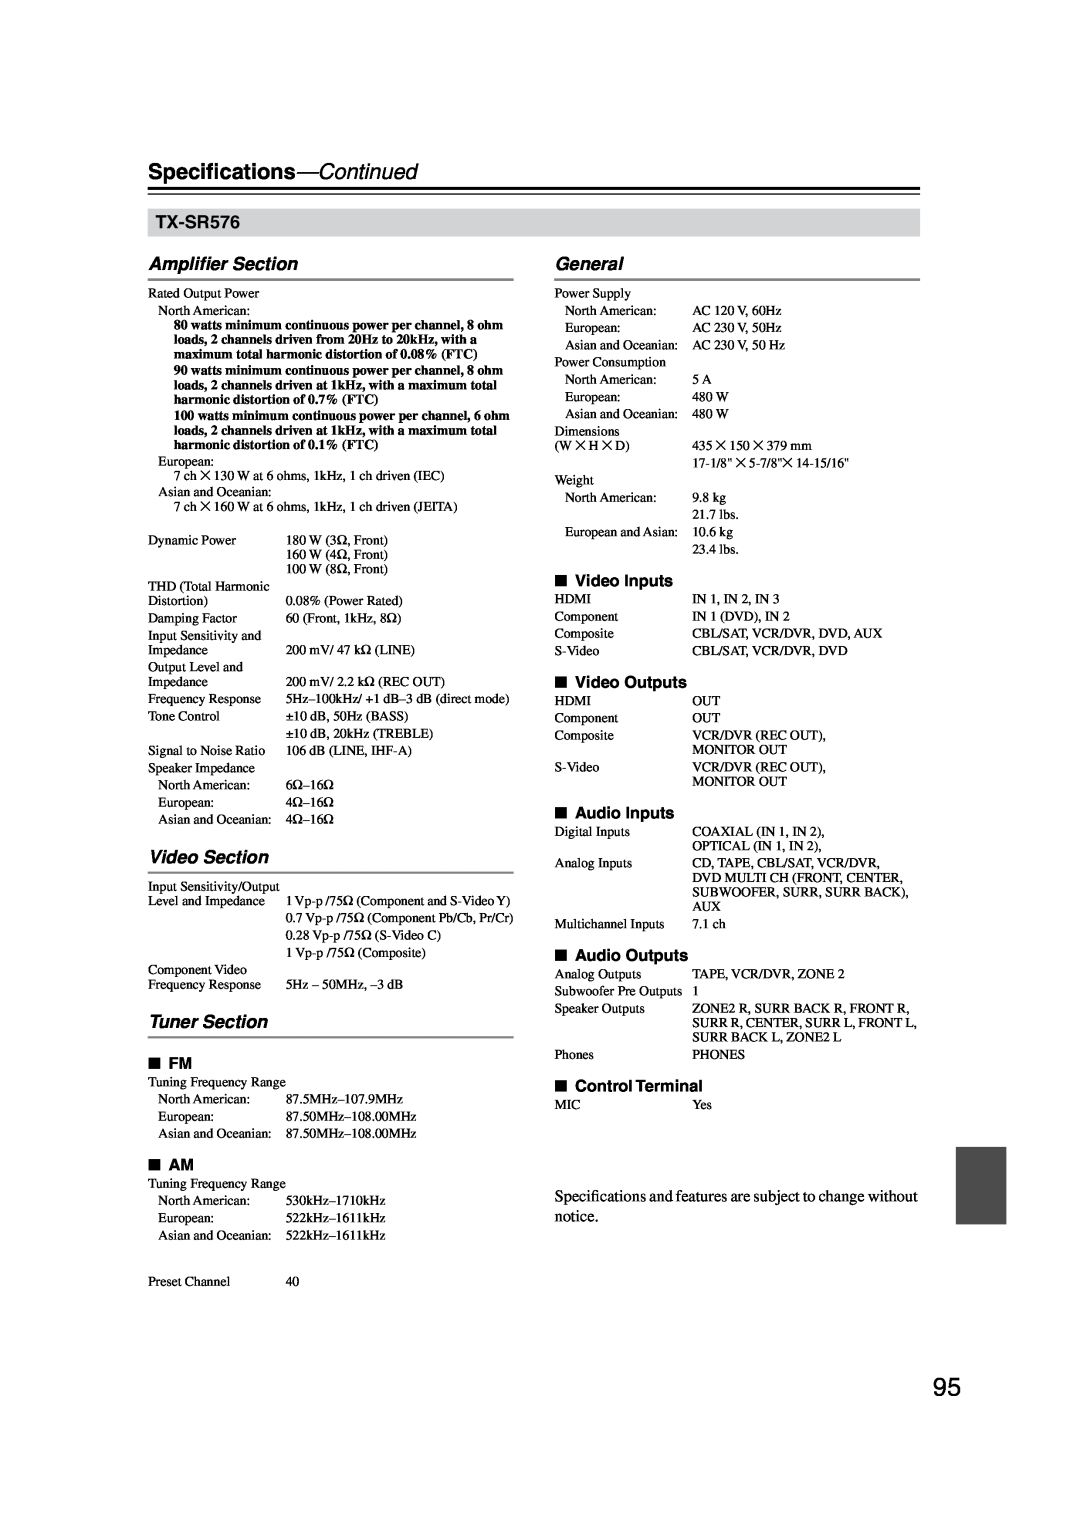 Onkyo TX-SR576, TX-SR506 instruction manual Speciﬁcations—Continued, Ampliﬁer Section, Video Section, Tuner Section, General 